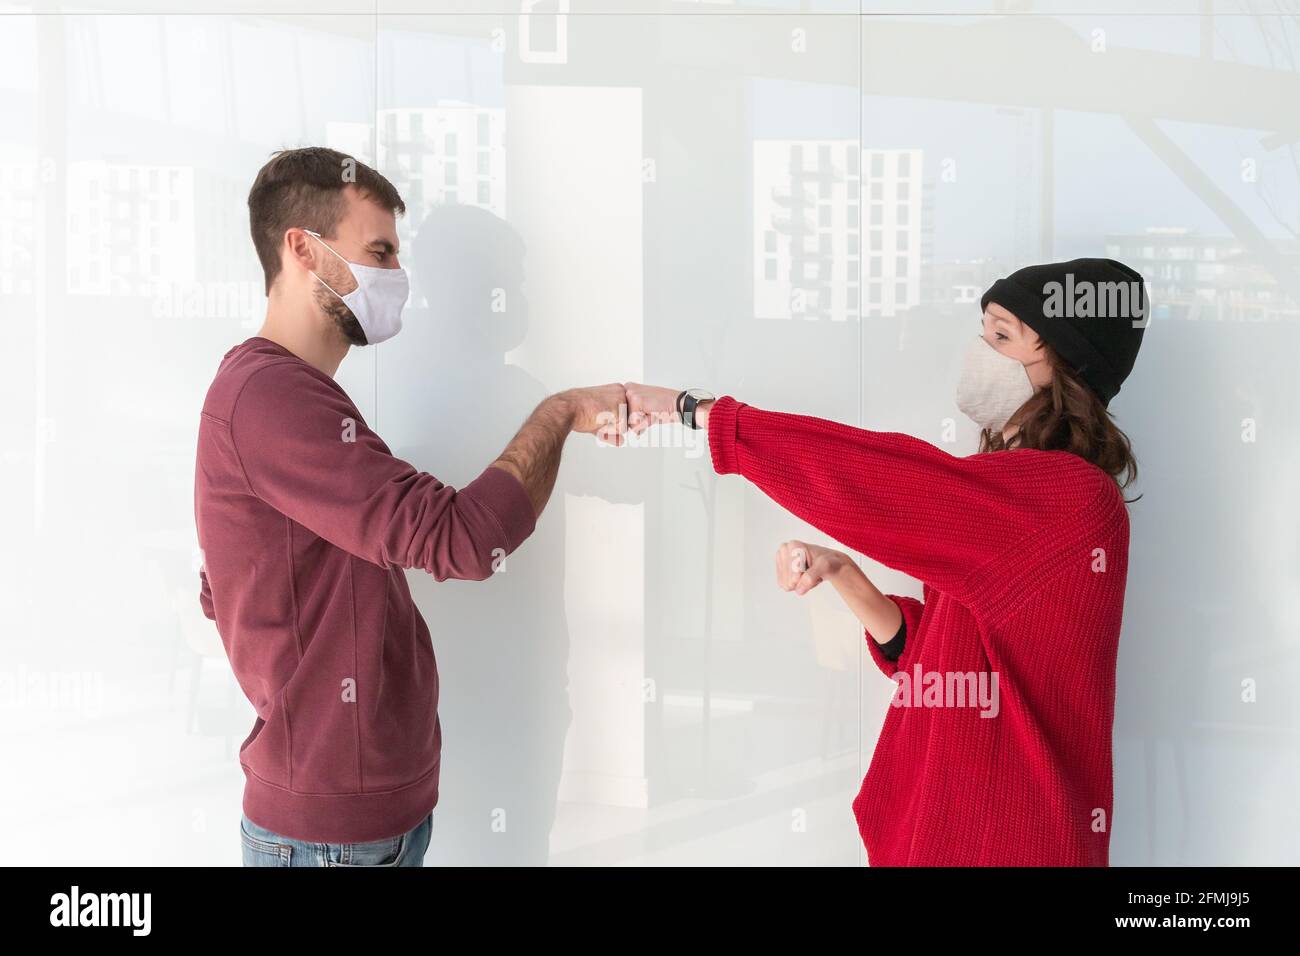 Greeting giving hand fist bump. Alternative handshakes. Fist collision bump greeting. People greeting during COVID-19 pandemic Stock Photo